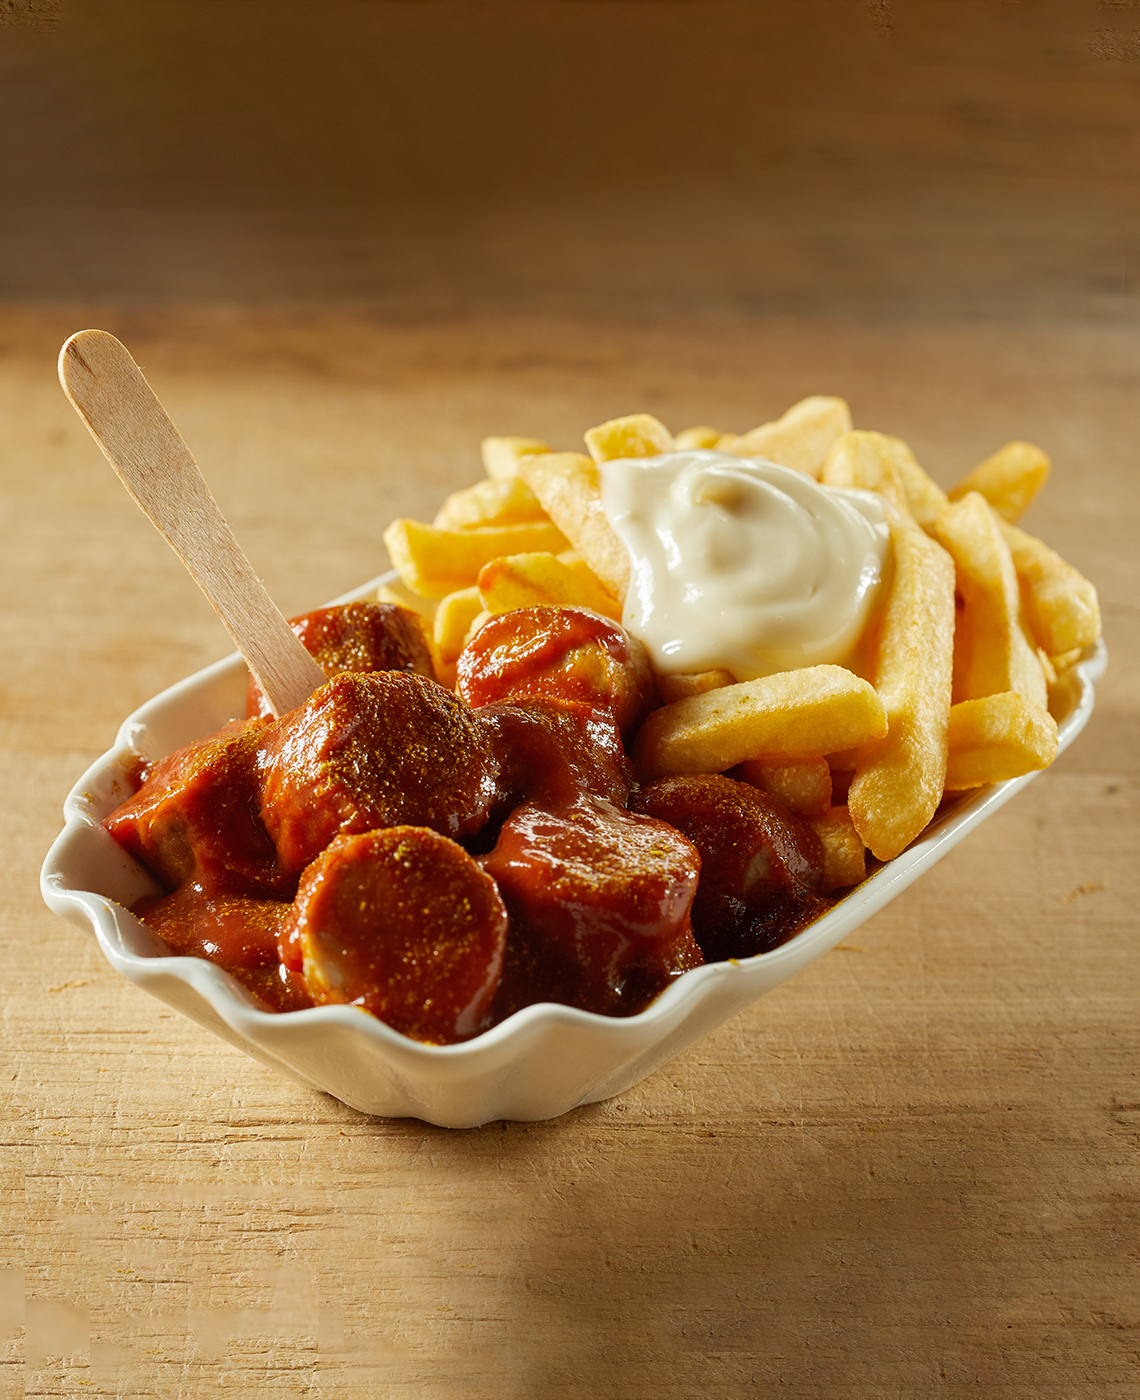 Currywurst and fries on a wooden table